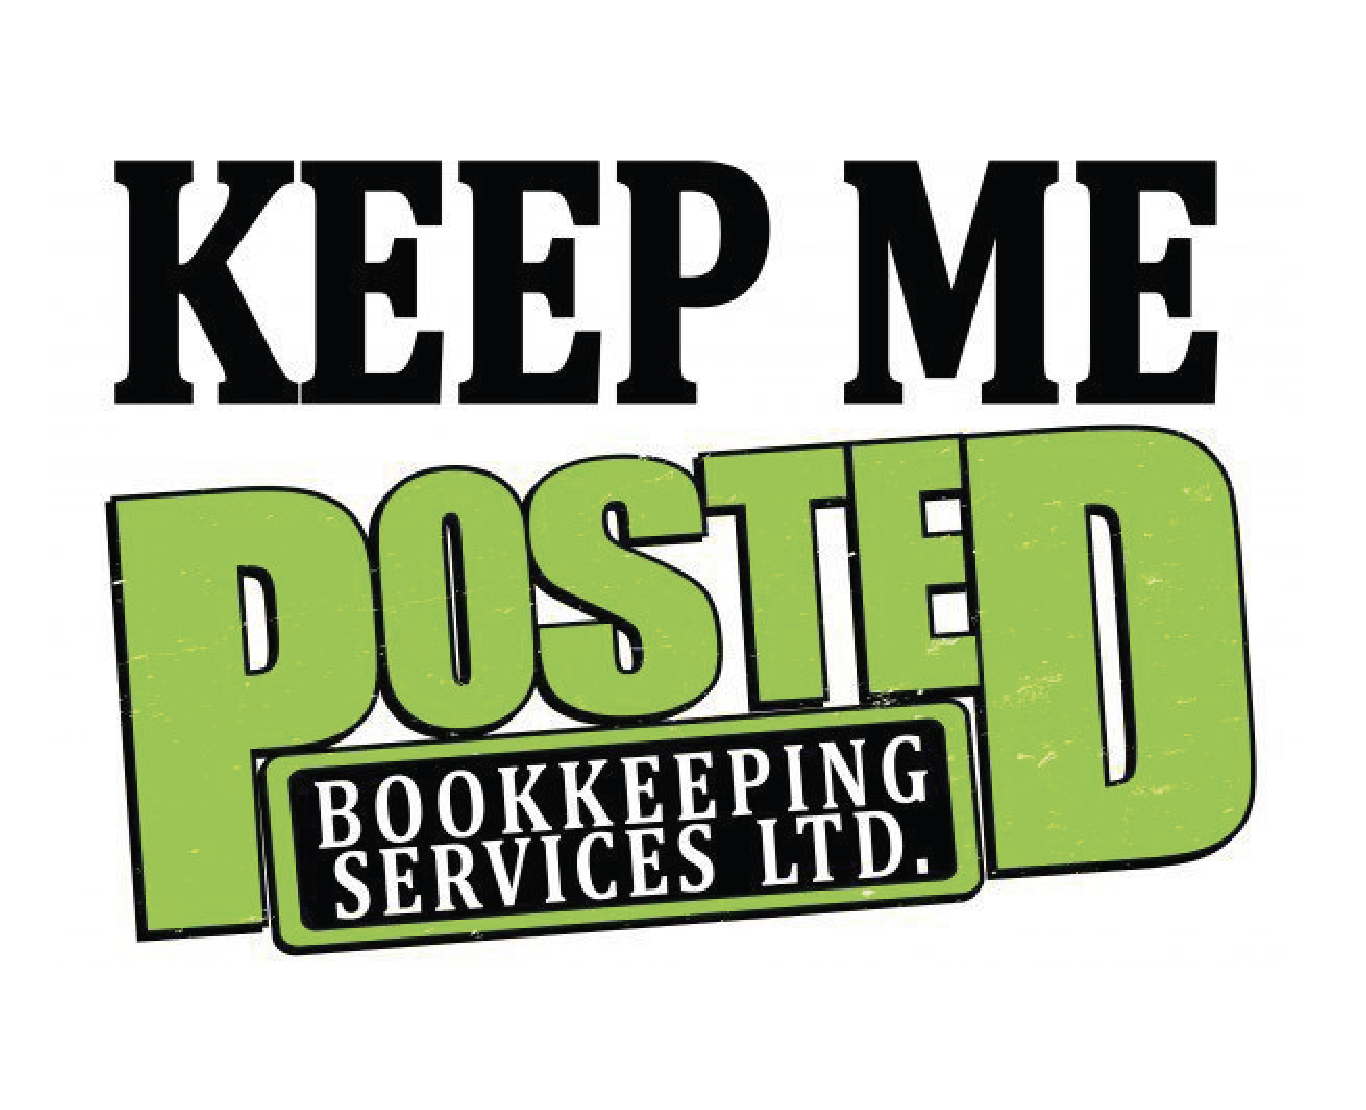 Keep Me Posted Bookkeeping